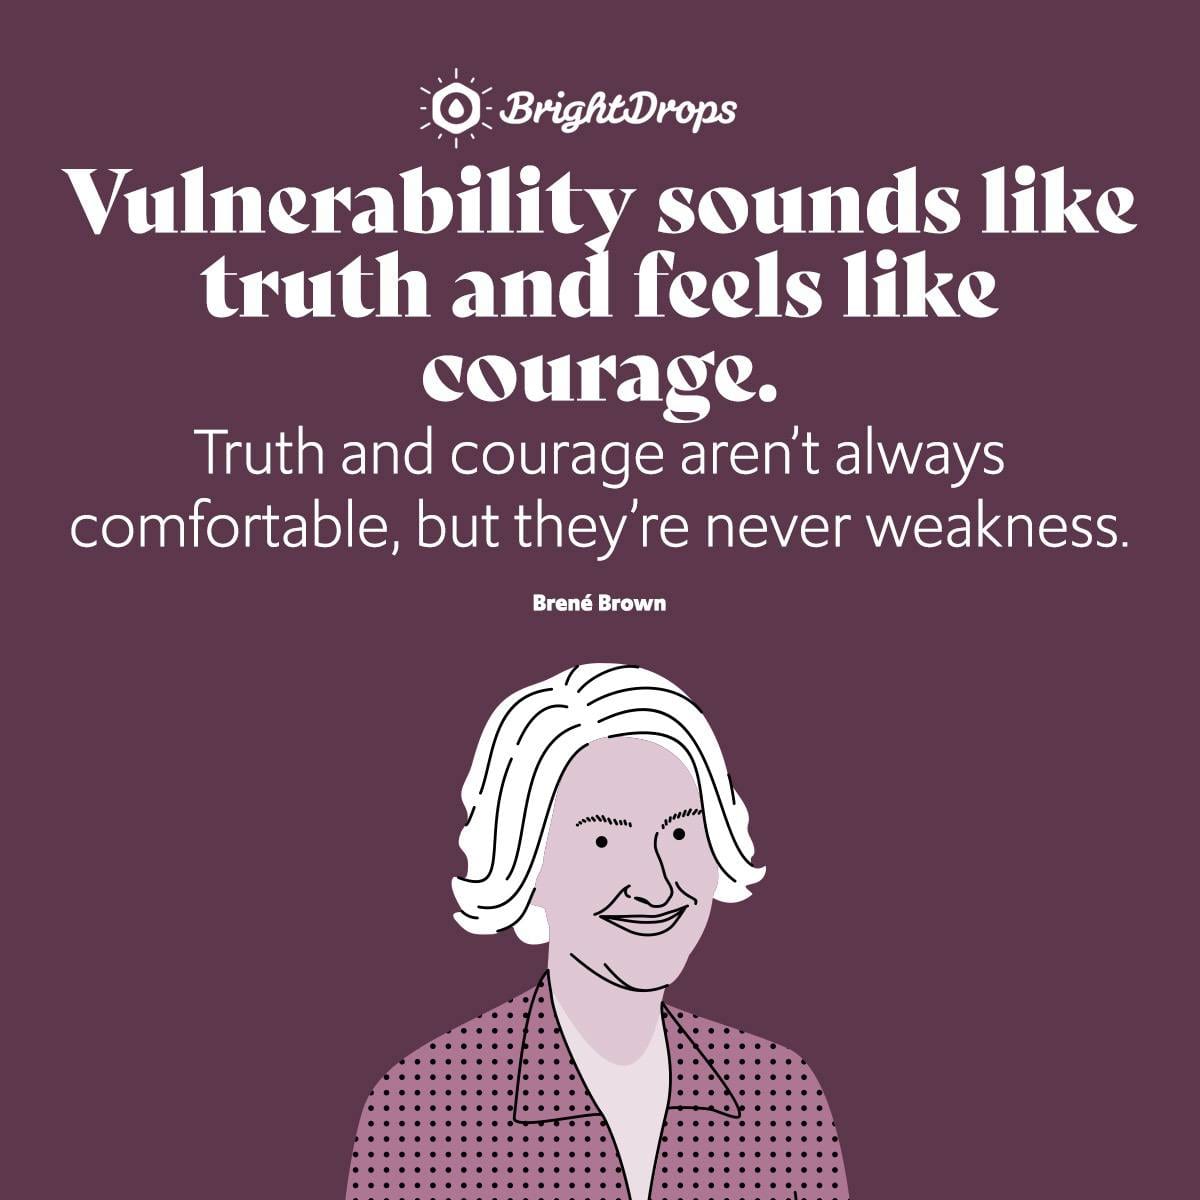 Vulnerability sounds like truth and feels like courage. Truth and courage aren’t always comfortable, but they’re never weakness.